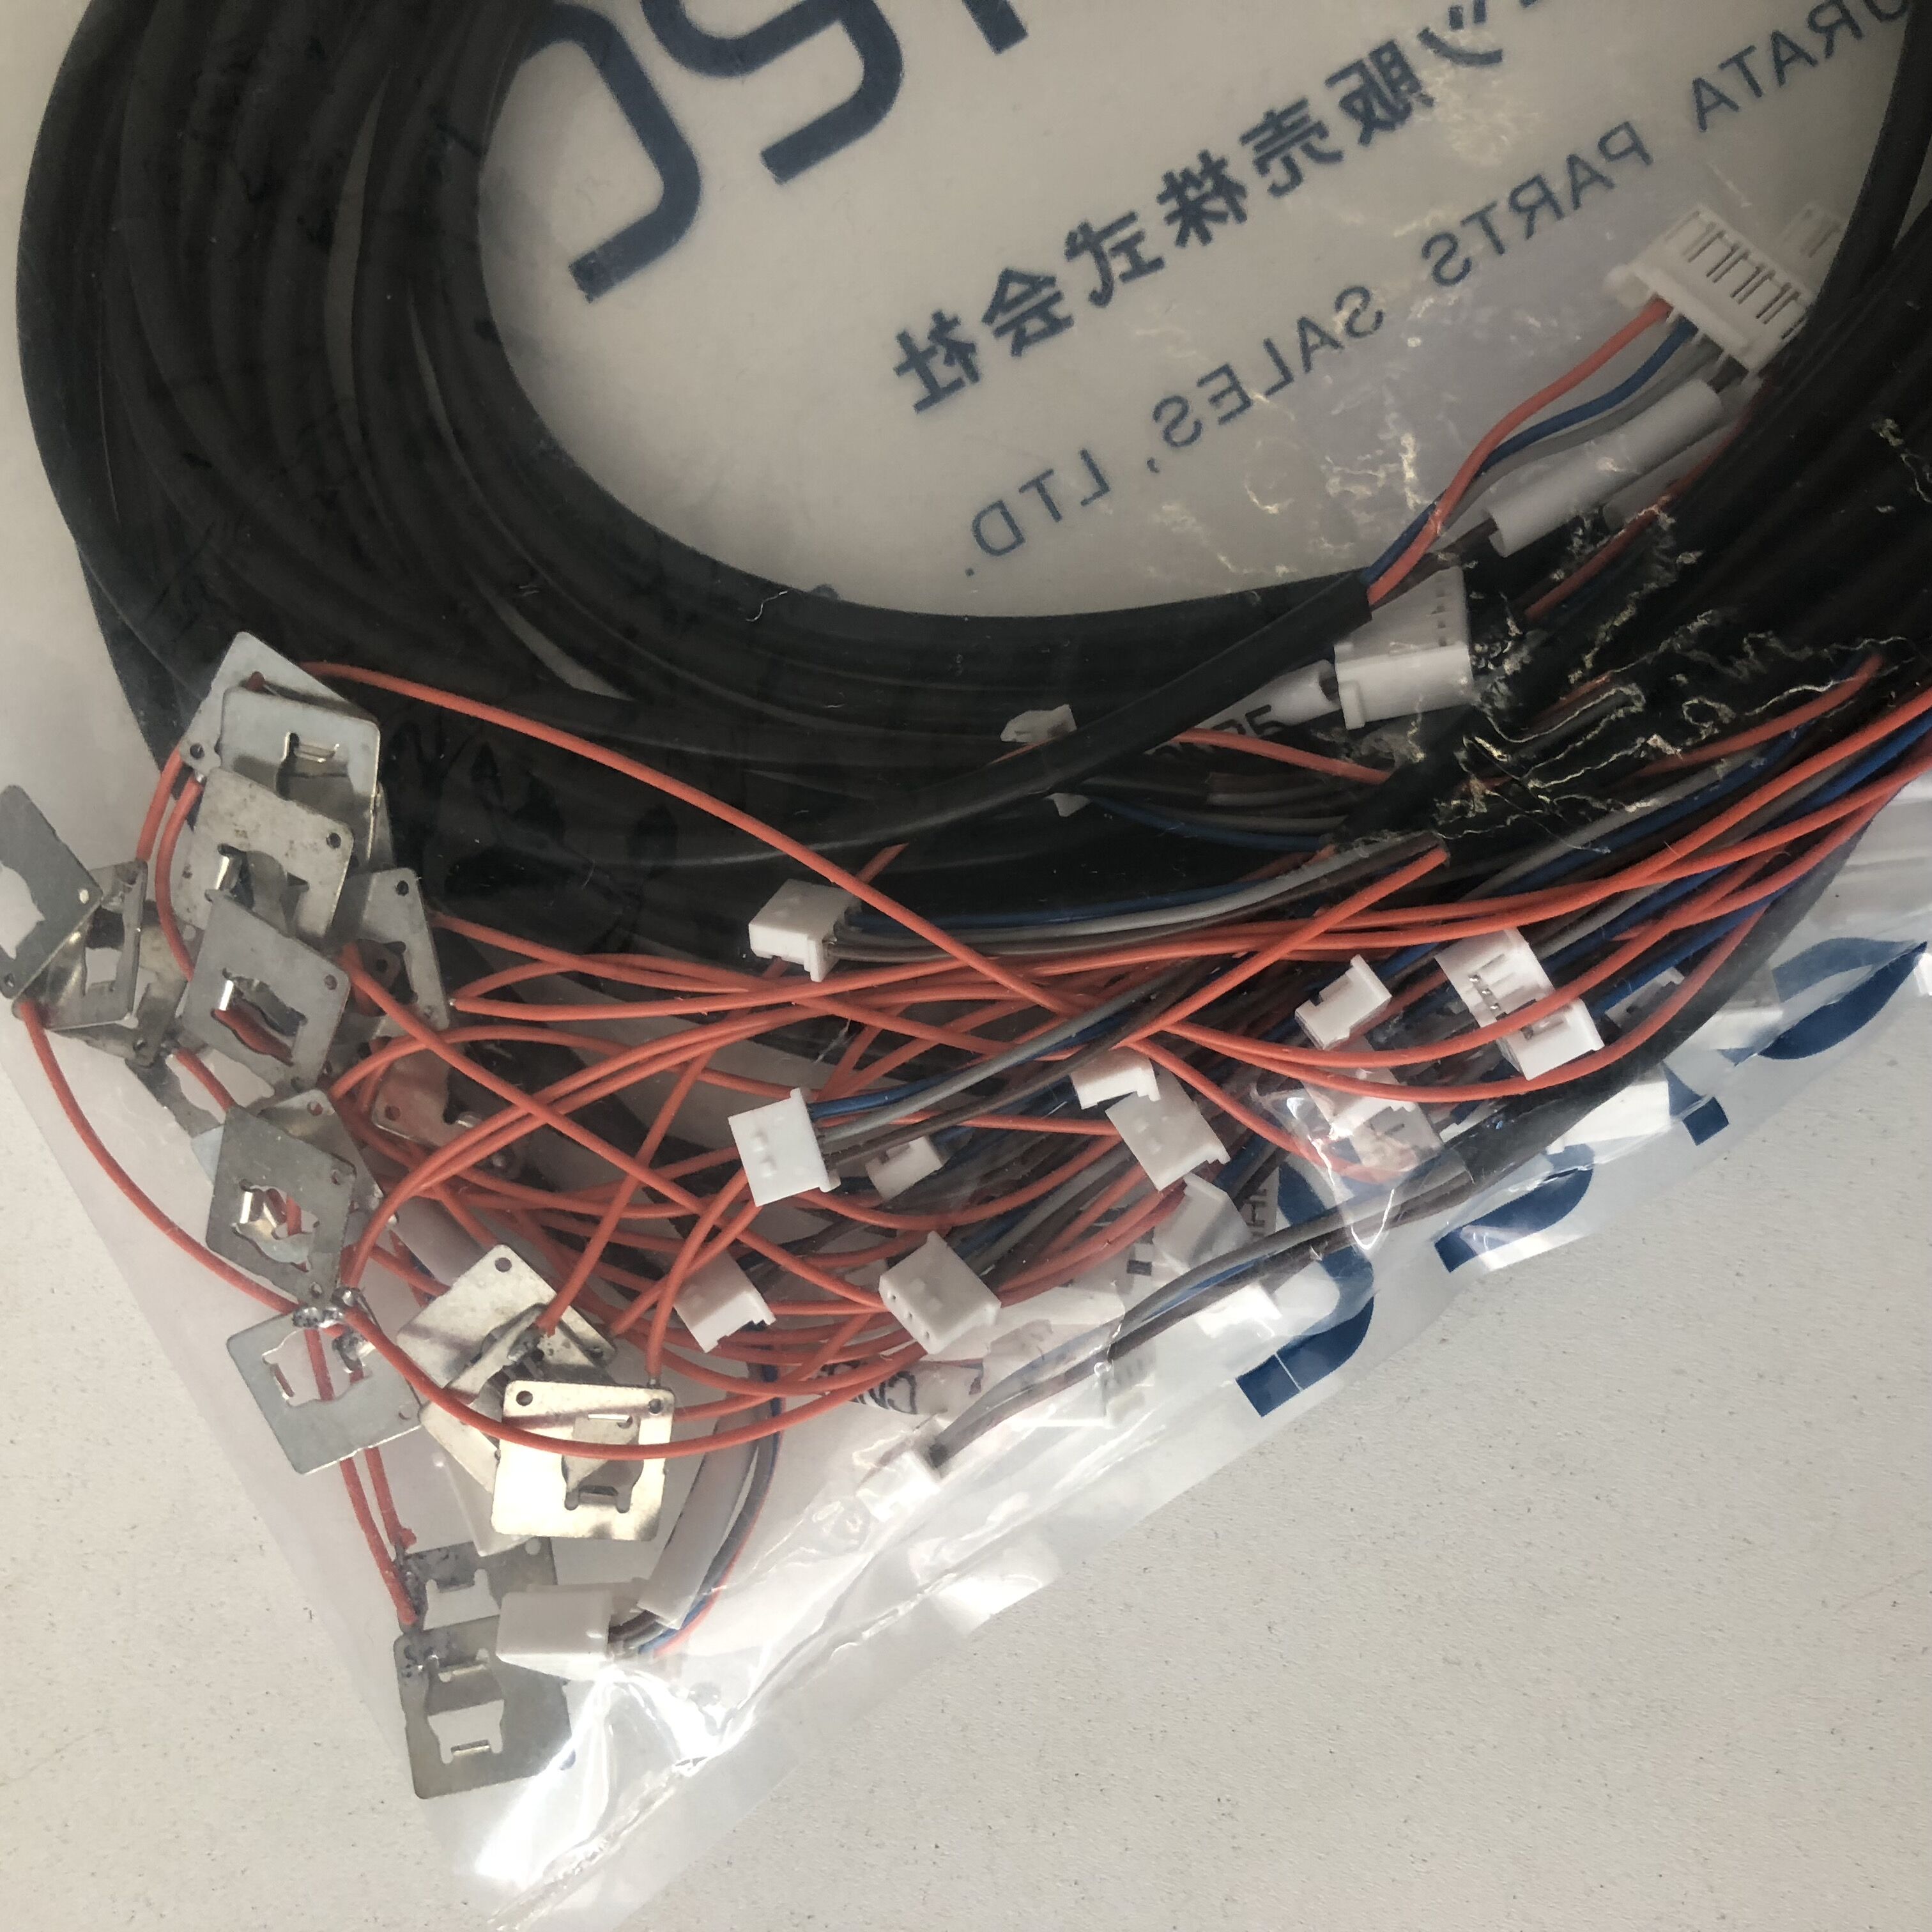 Balcon Cable for Murata winder machinery with part no. 21A-E01-032